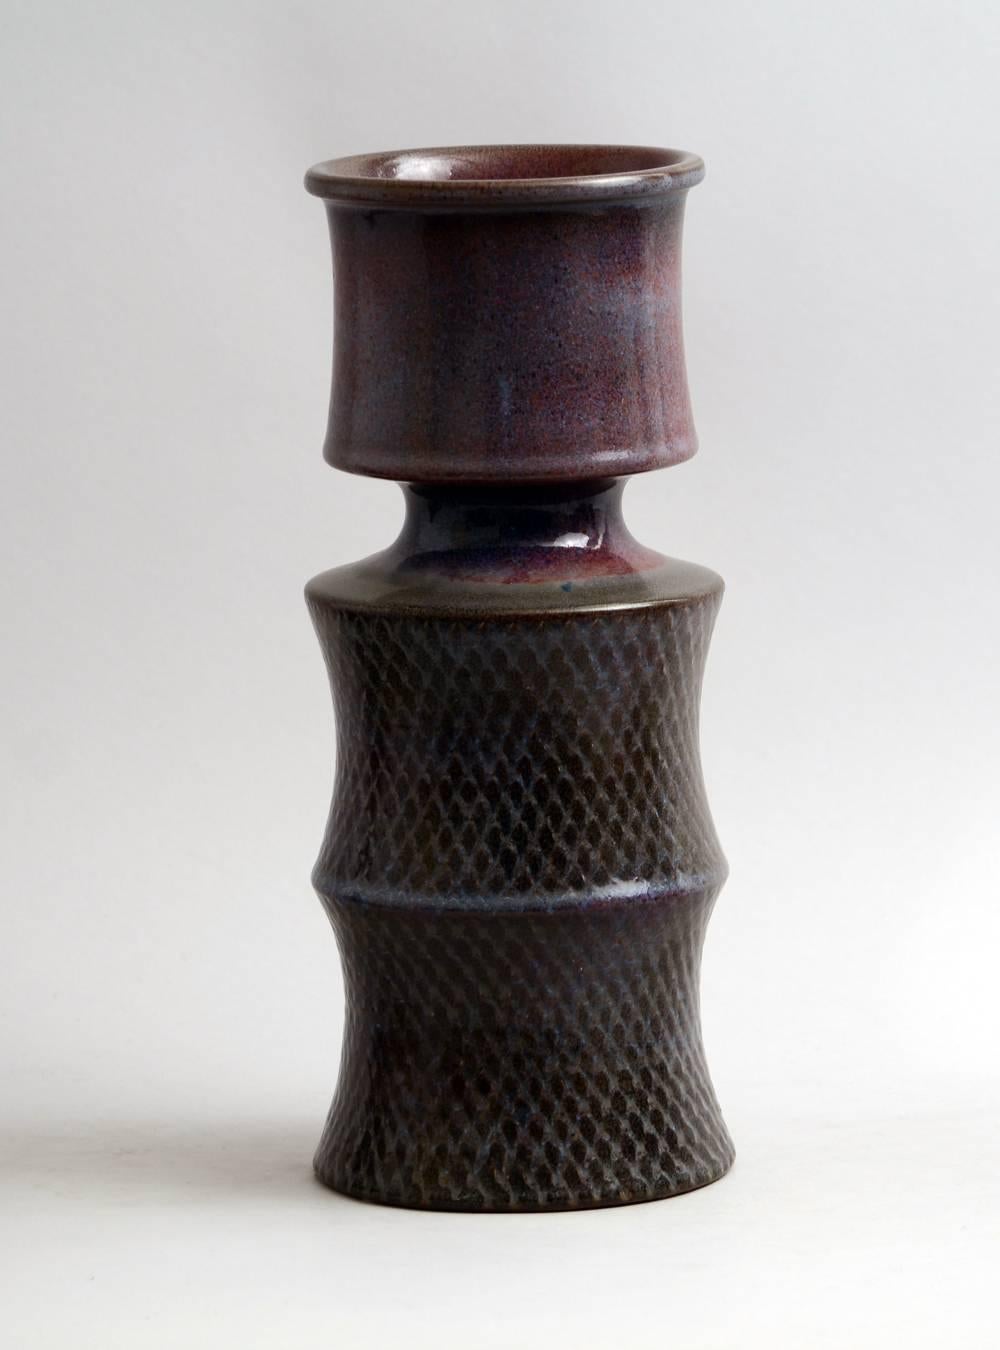 Stig Lindberg for Gustavsberg, Sweden

Unique stoneware vase with purple glossy glaze and impressed pattern to body, 1969.
Measures: Height 13 1/4